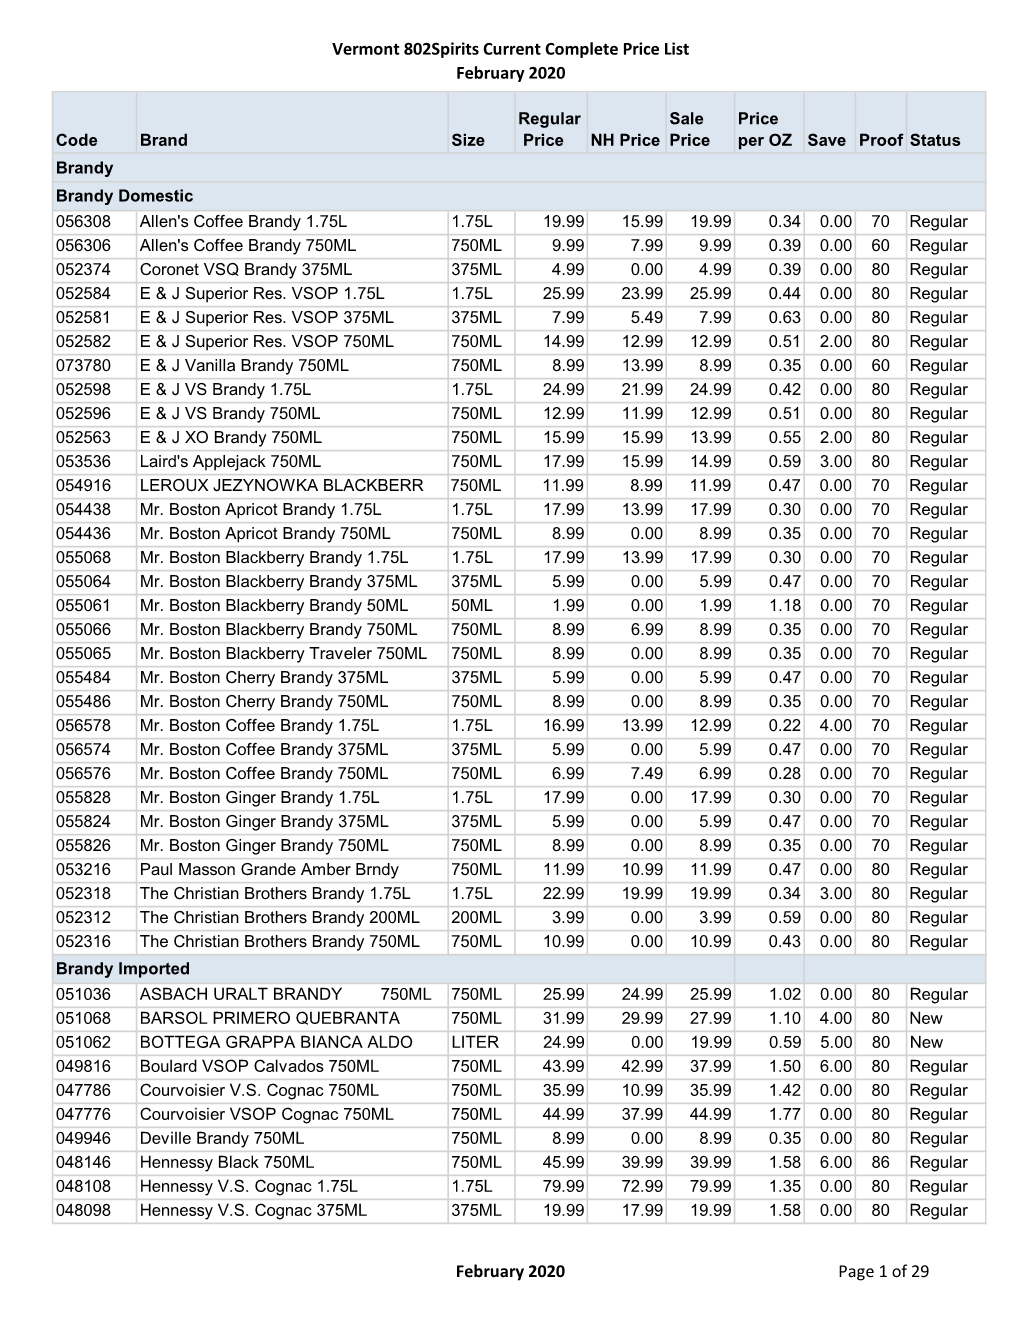 Vermont 802Spirits Current Complete Price List February 2020